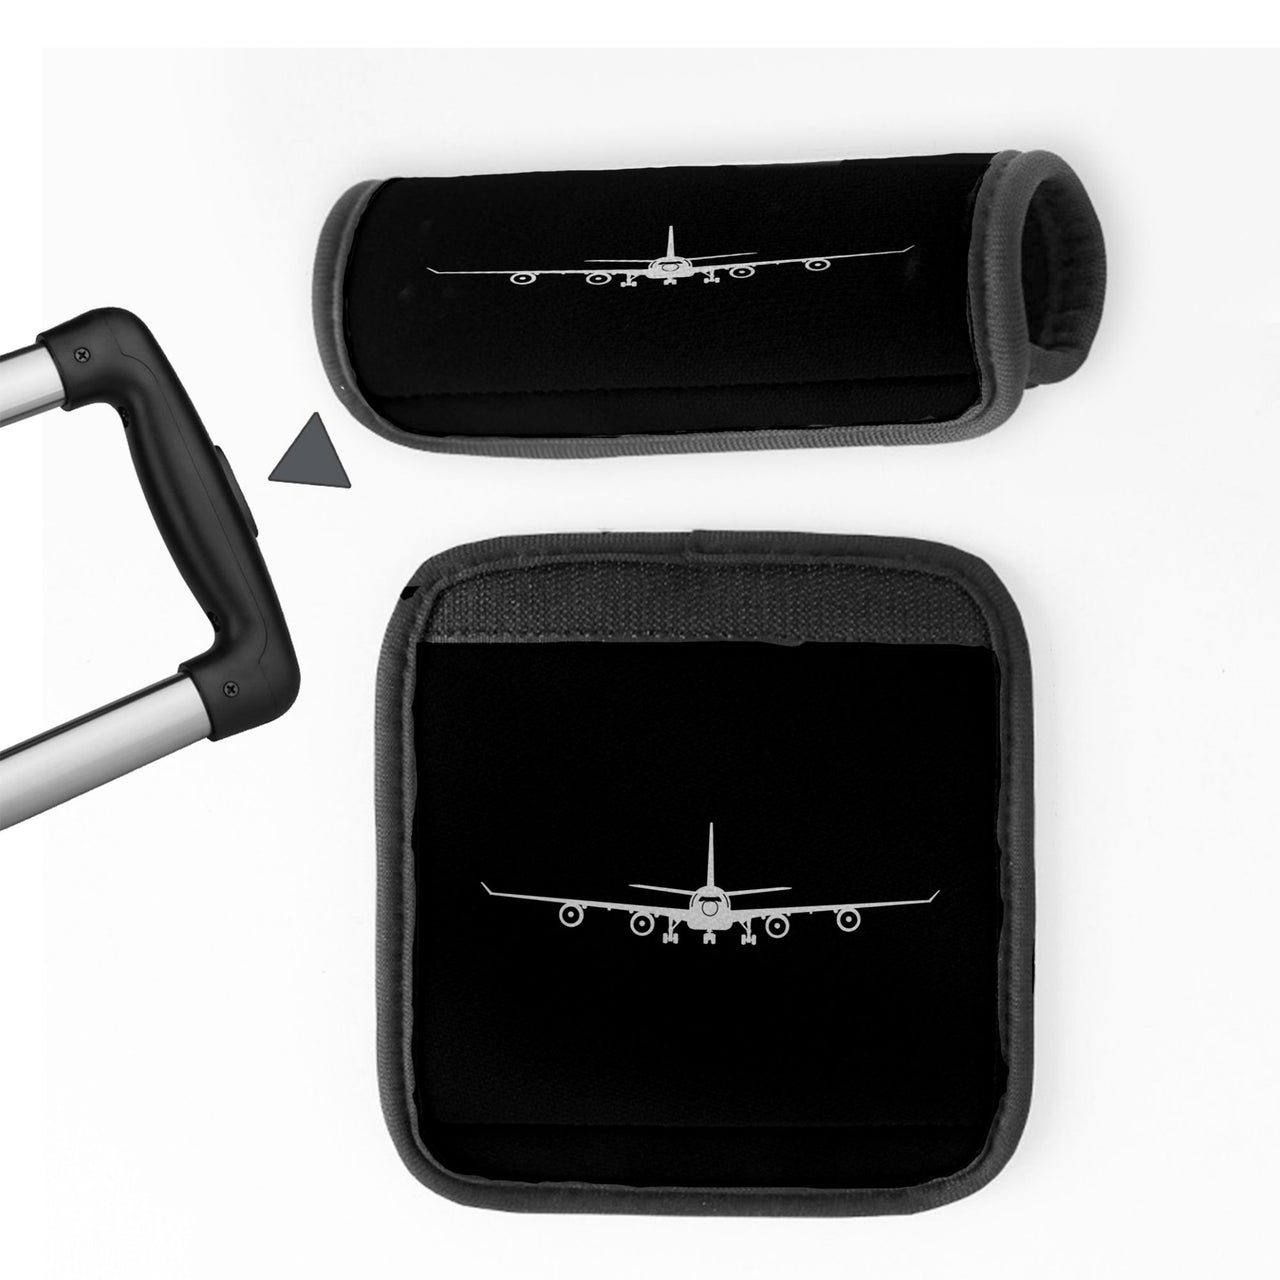 Airbus A340 Silhouette Designed Neoprene Luggage Handle Covers